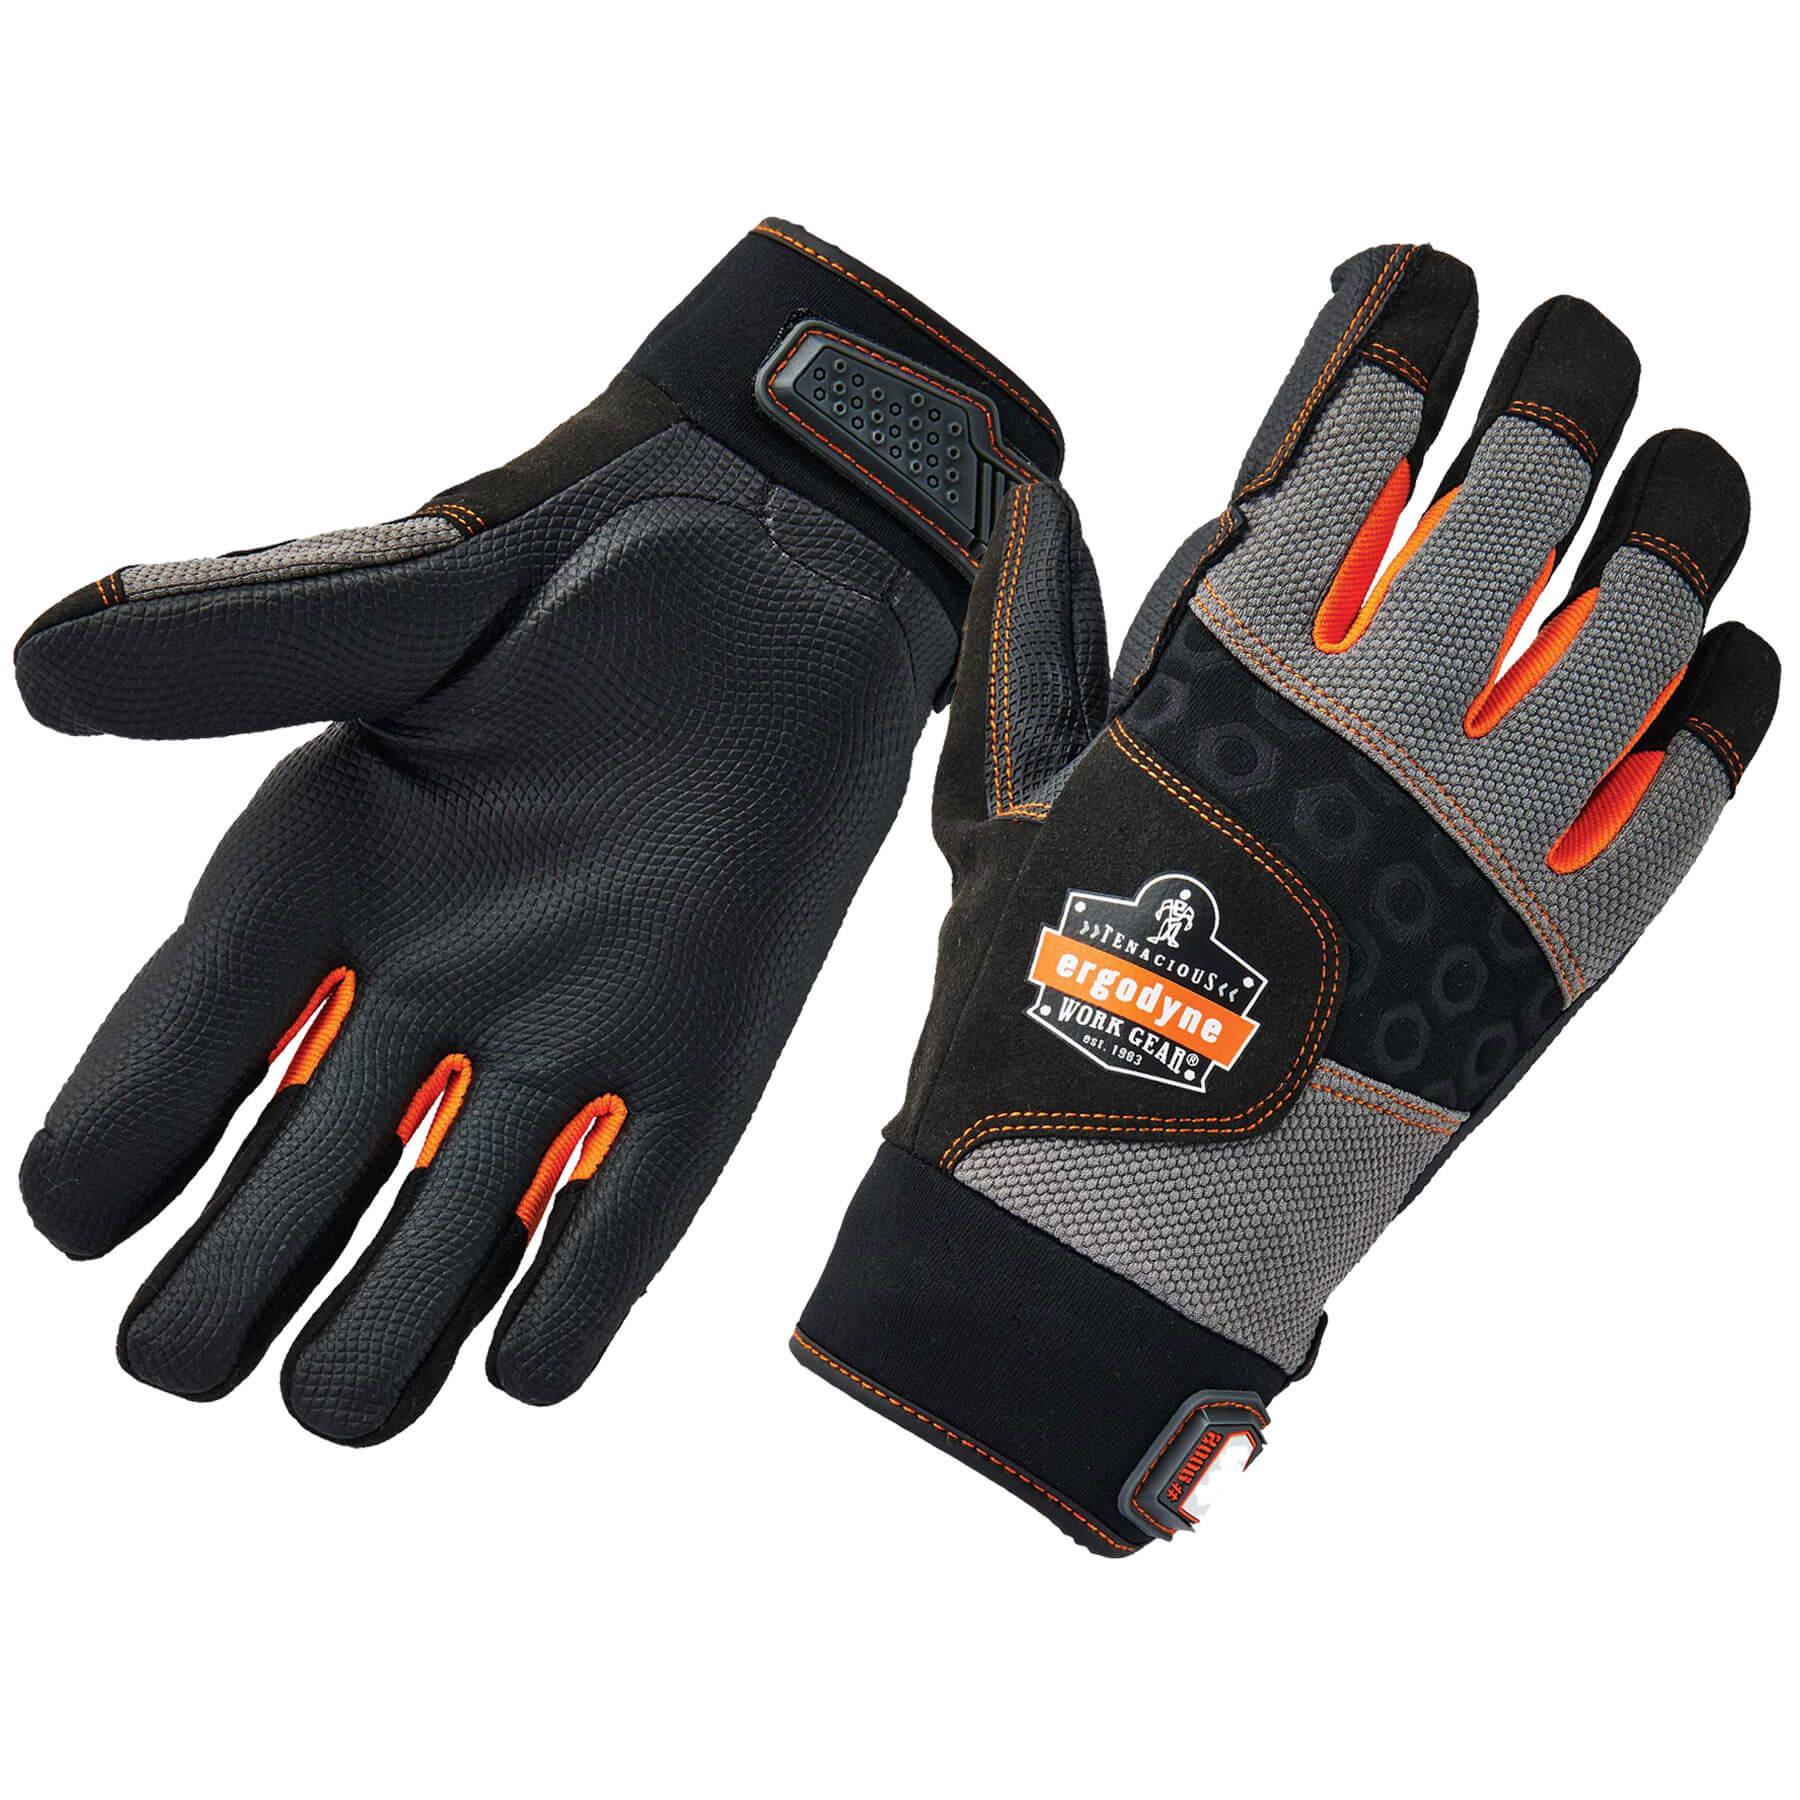 PROFLEX 9002 CERTIFIED ANTI-VIBE GLOVE - Tagged Gloves